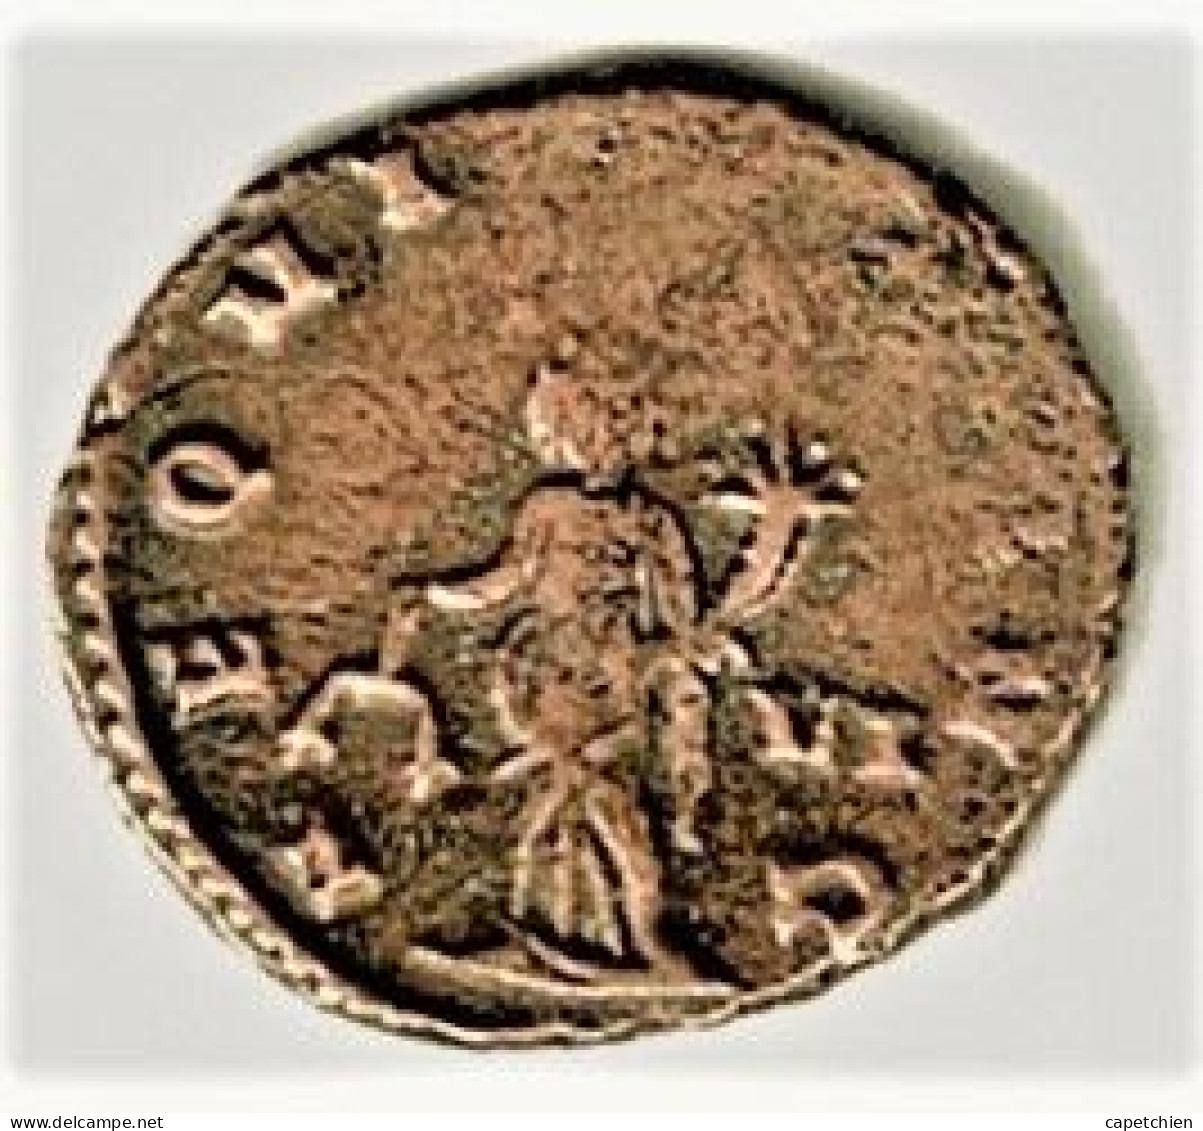 MONNAIE ROMAINE : GALLIEN / 3.29  G  / 18 Mm / - The Military Crisis (235 AD To 284 AD)